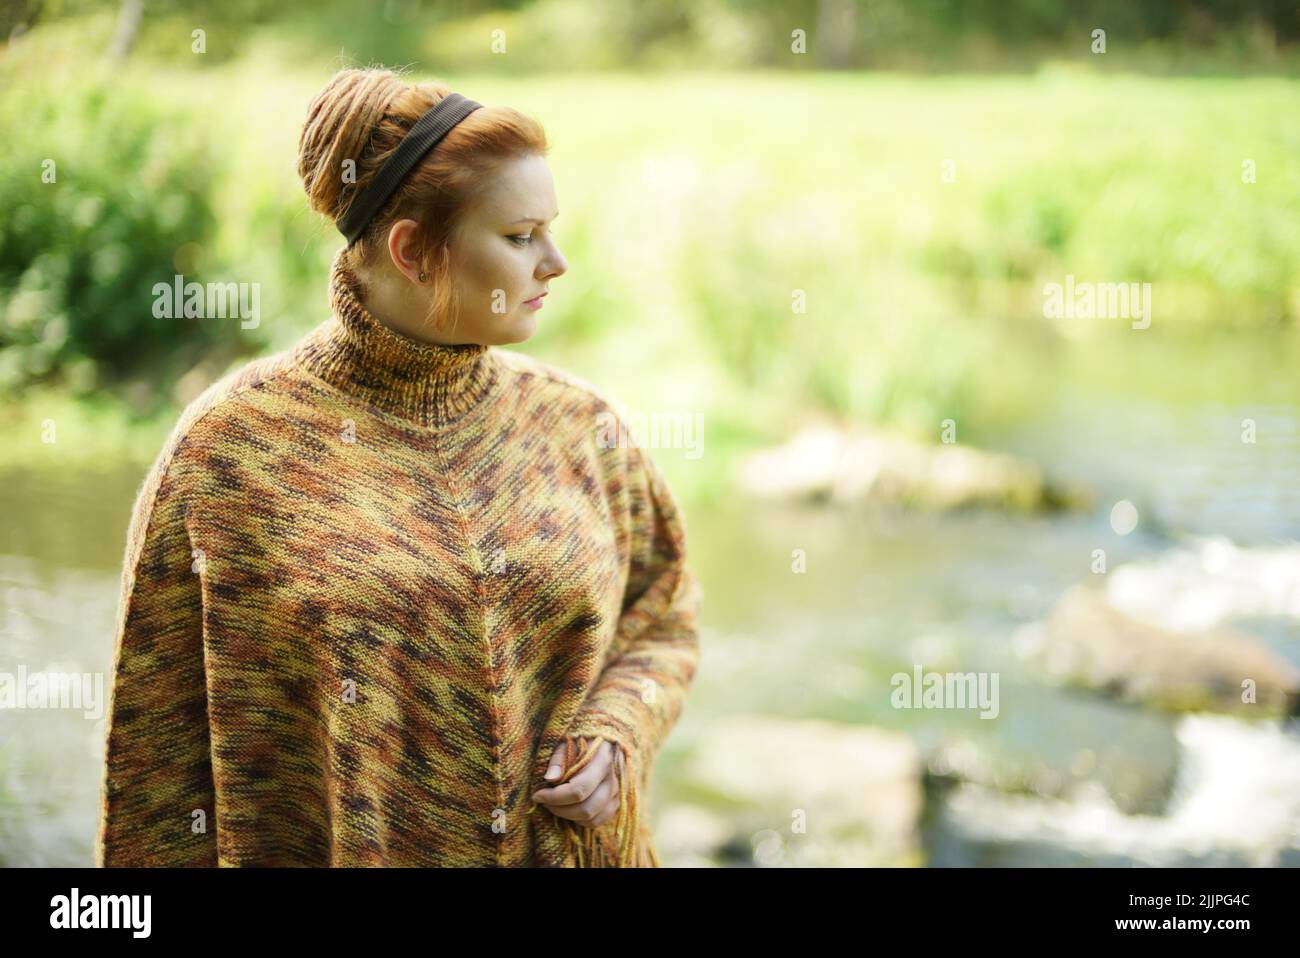 A chubby white female with ginger hair in a bun and a turtleneck posing near a river shore Stock Photo